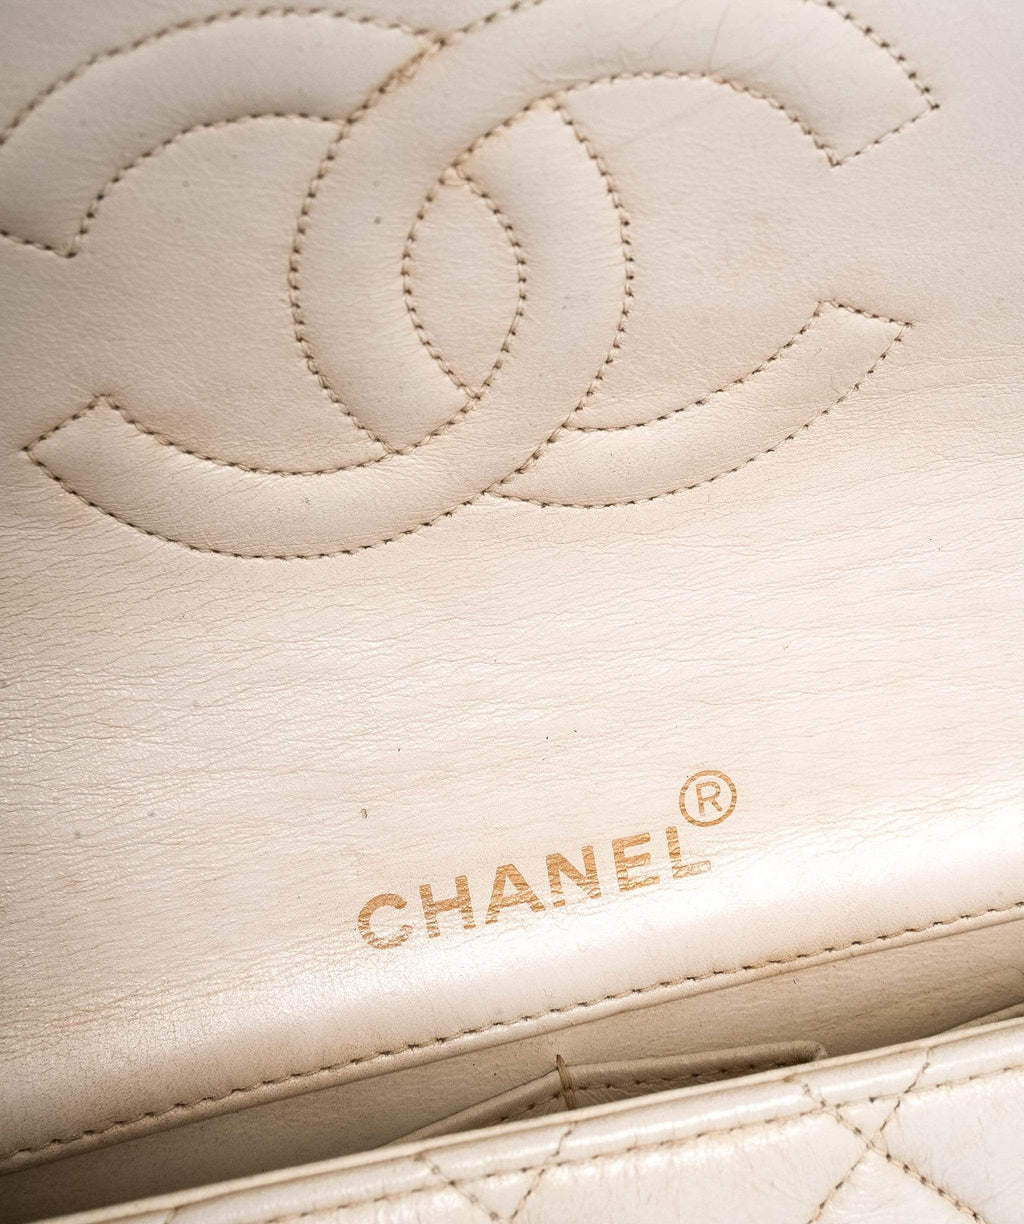 Chanel Vintage Small Jelly Bag - AWL1669 – LuxuryPromise